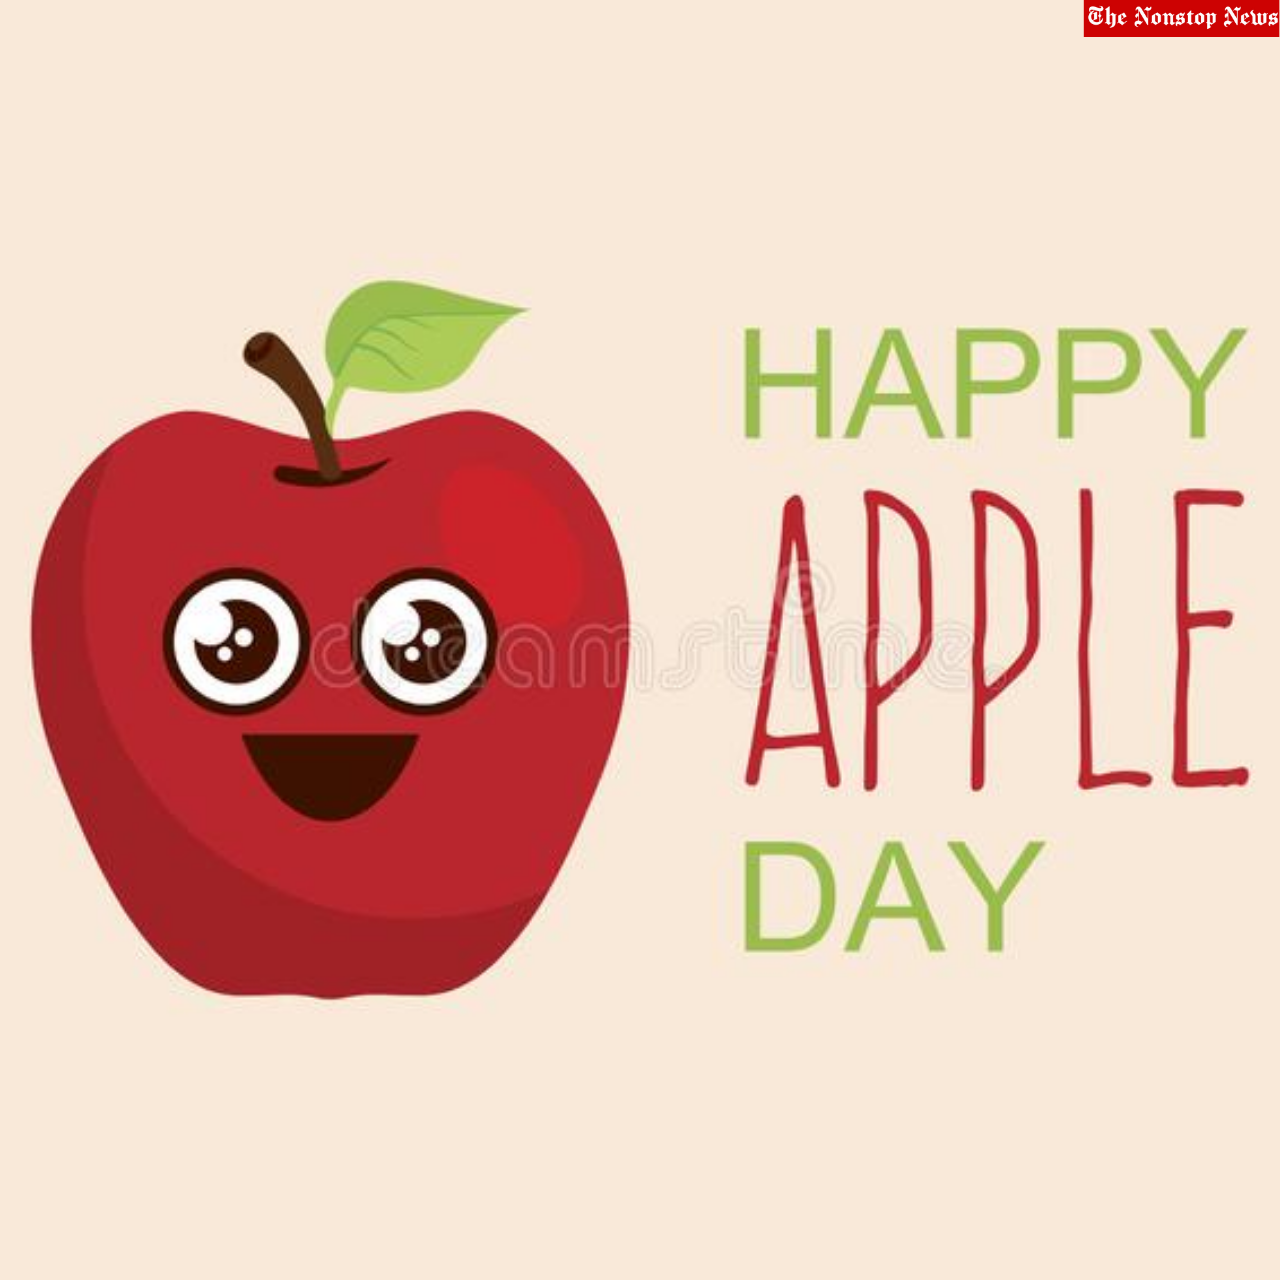 National Apple Day (US) 2021 Wishes, HD Images, Quotes, Stickers, and Messages to Share